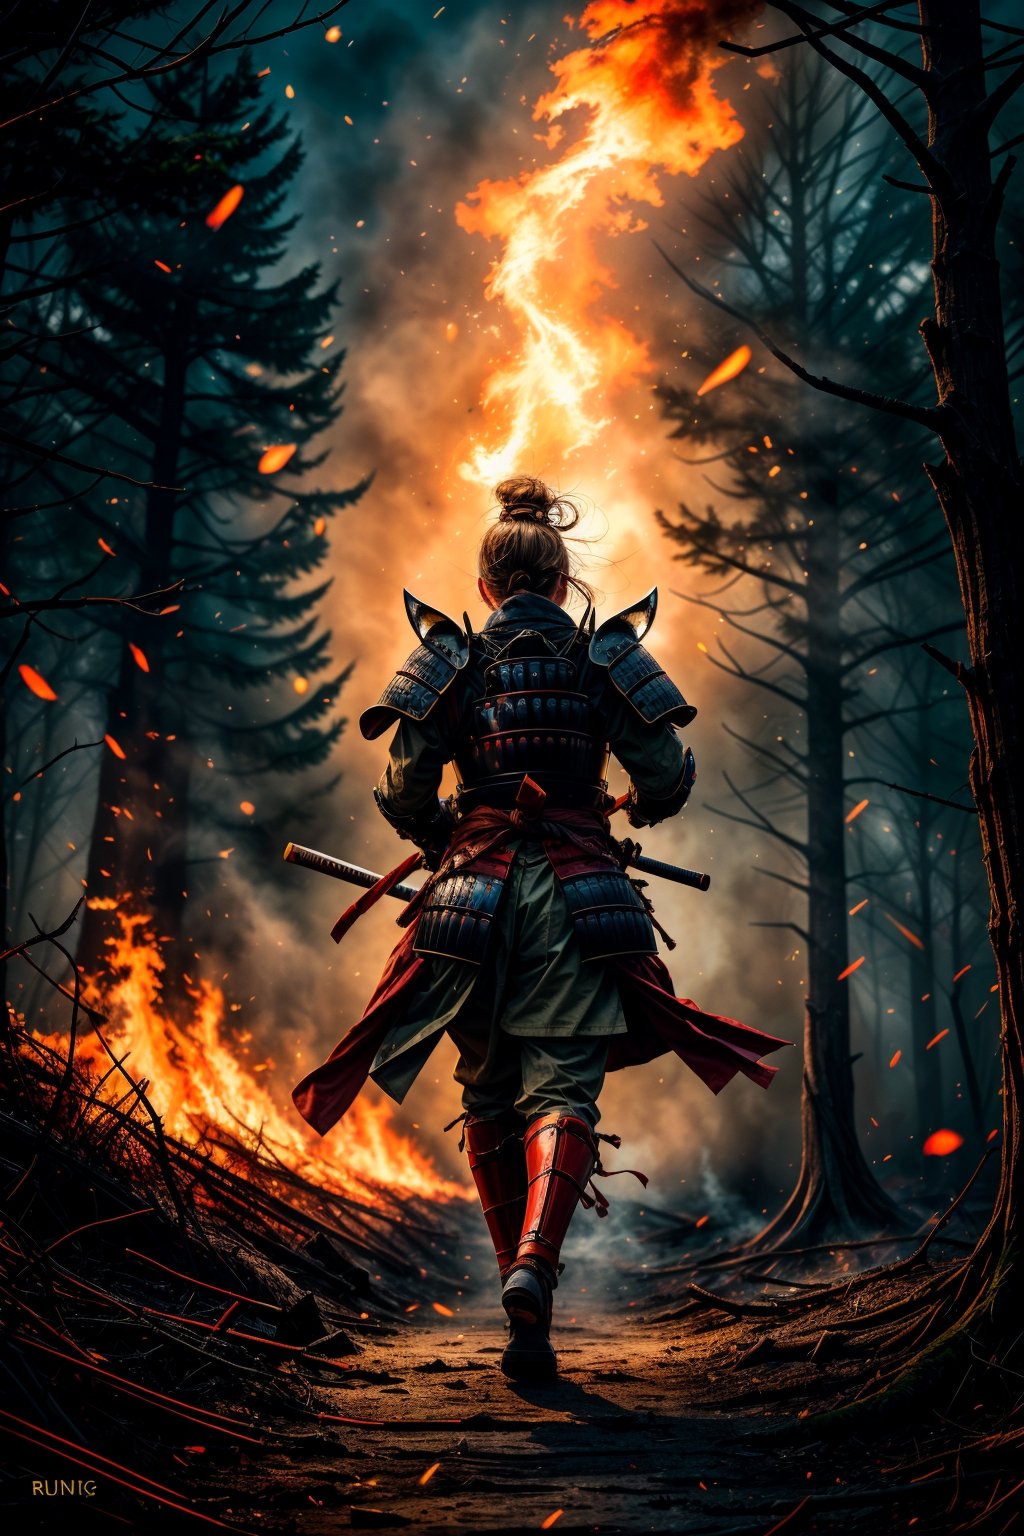 female samurai, charming eyes, long hair, angry, roaring, samurai armor, samurai sword {rising samurai sword}, running fast{runnung to audience}}, extremely bloody, forest on fire, flames, bright lights, sharp focus, perfect shading, masterpiece, best quality, extremely detailed, highres, photorealistic, full body